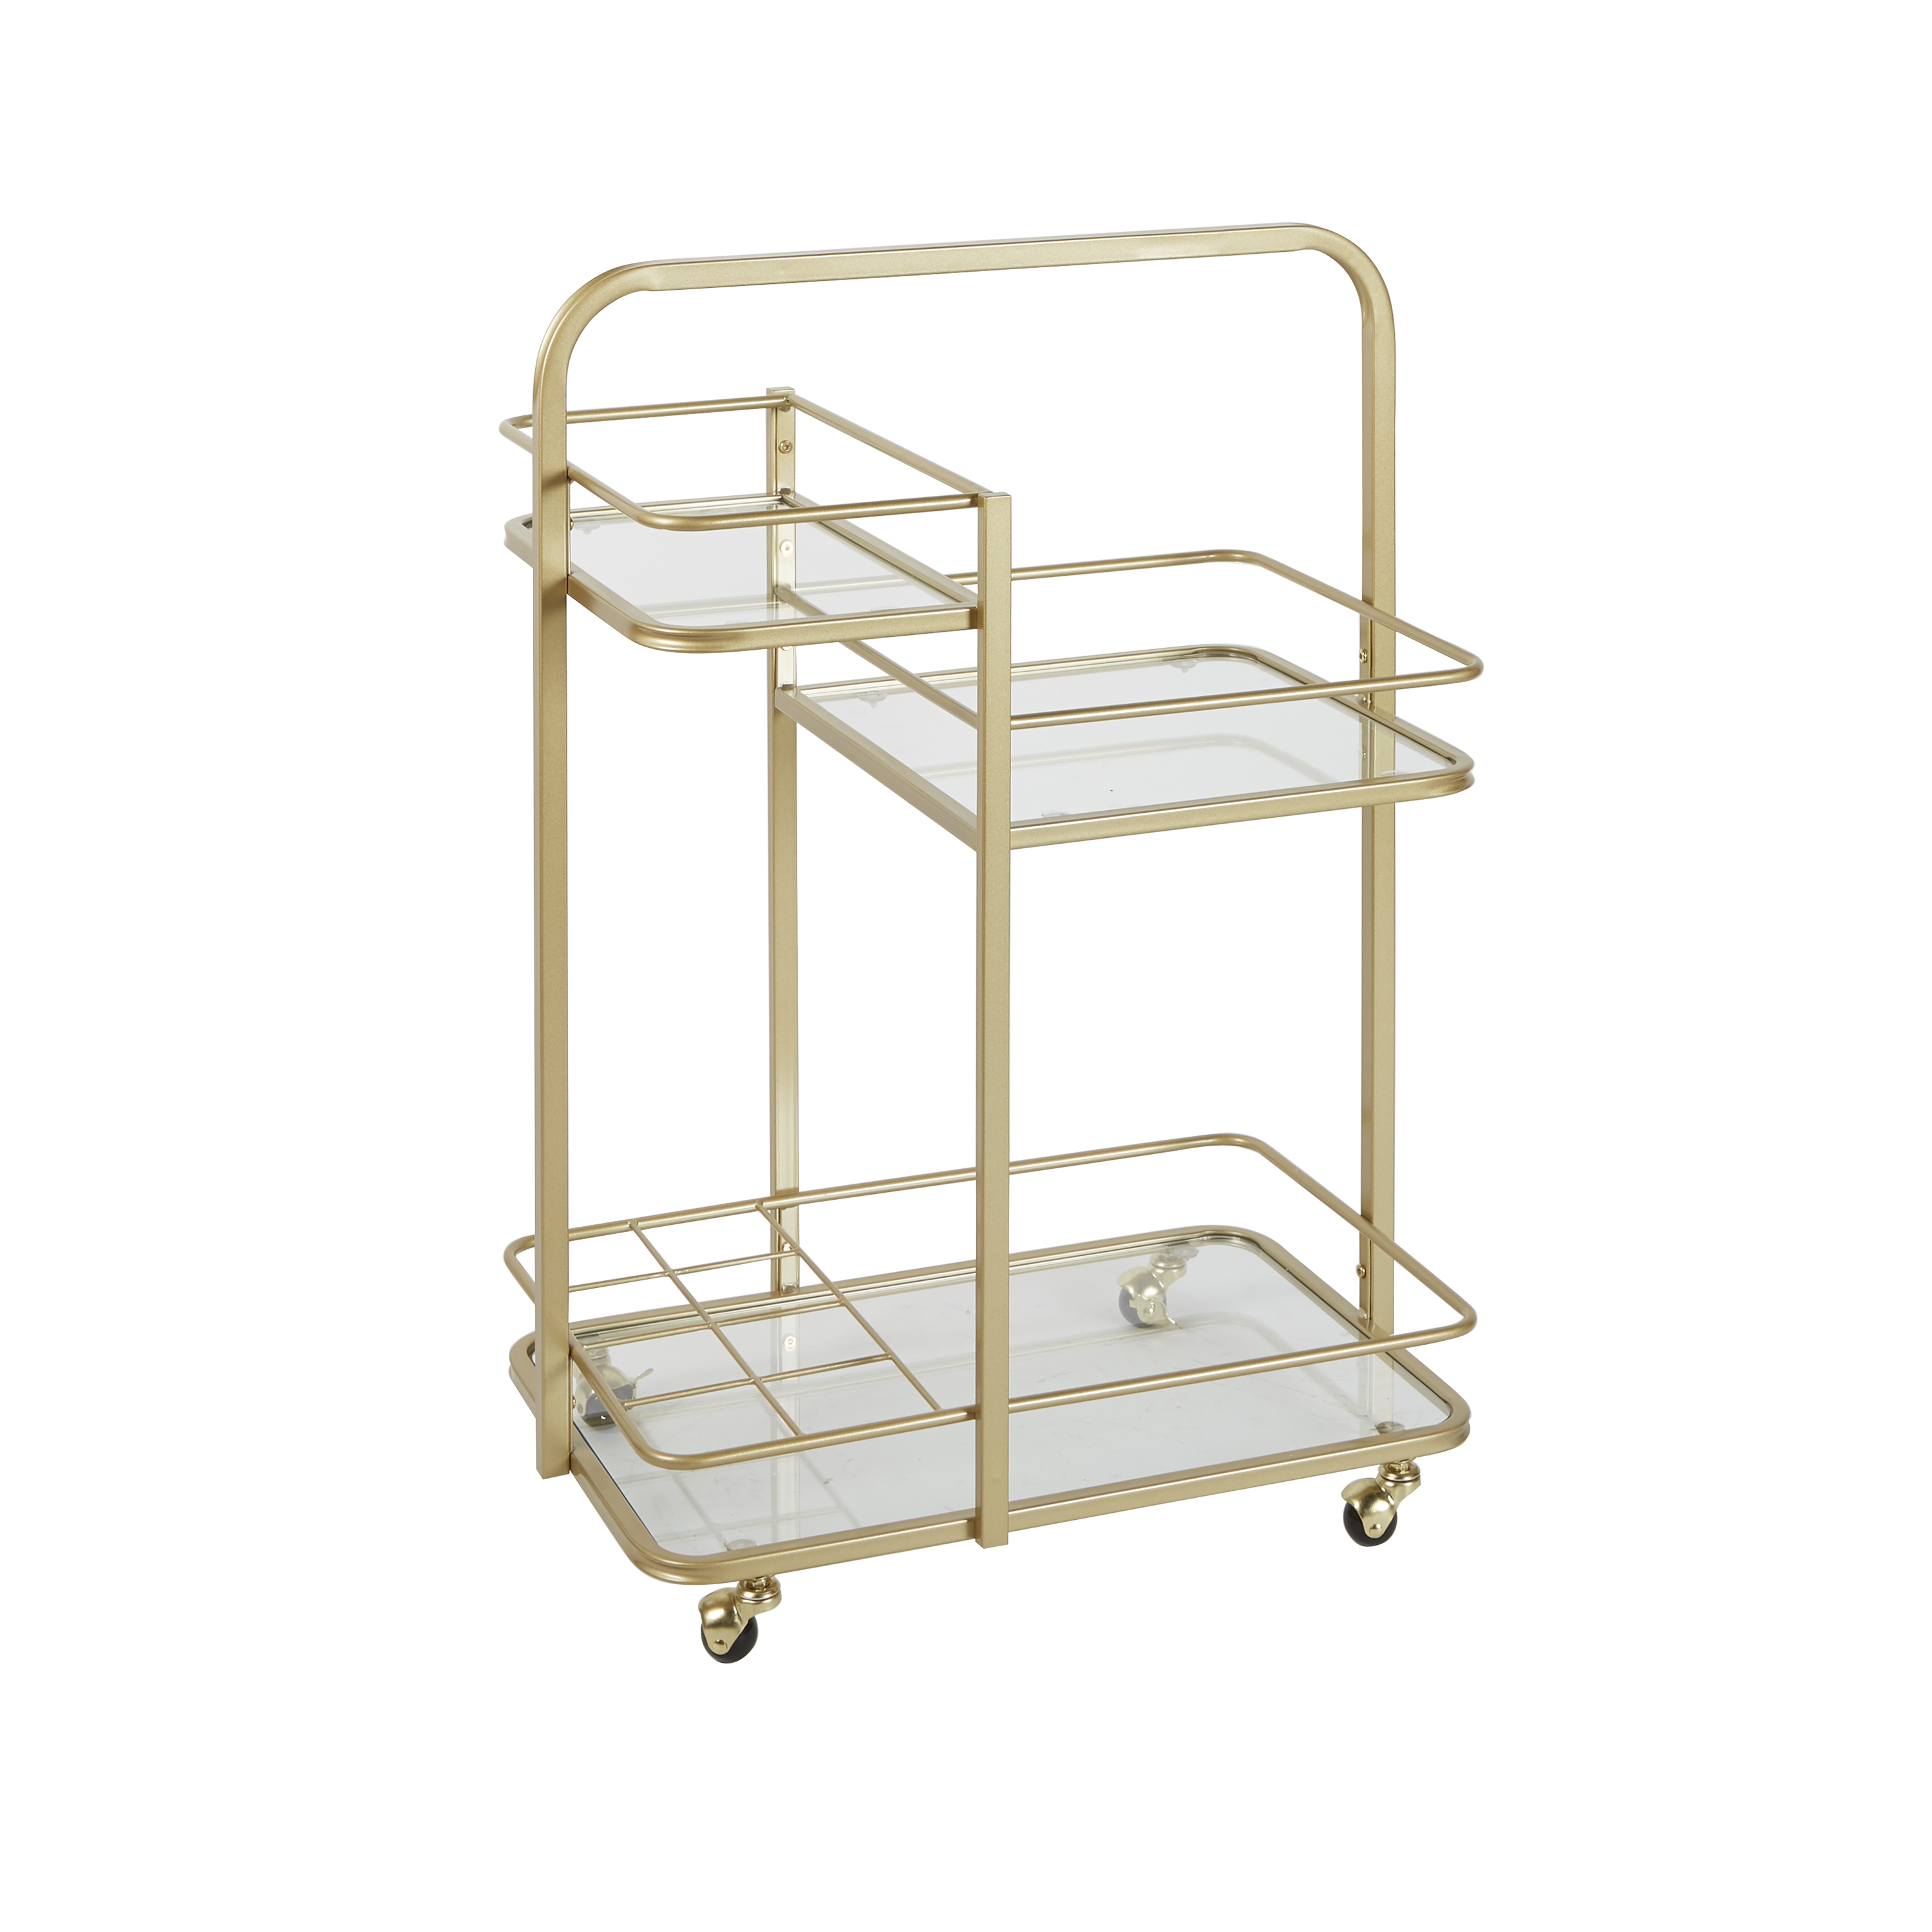 Adornments Gold Metal Serving Barcart with 3 Glass Shelves - image 5 of 6